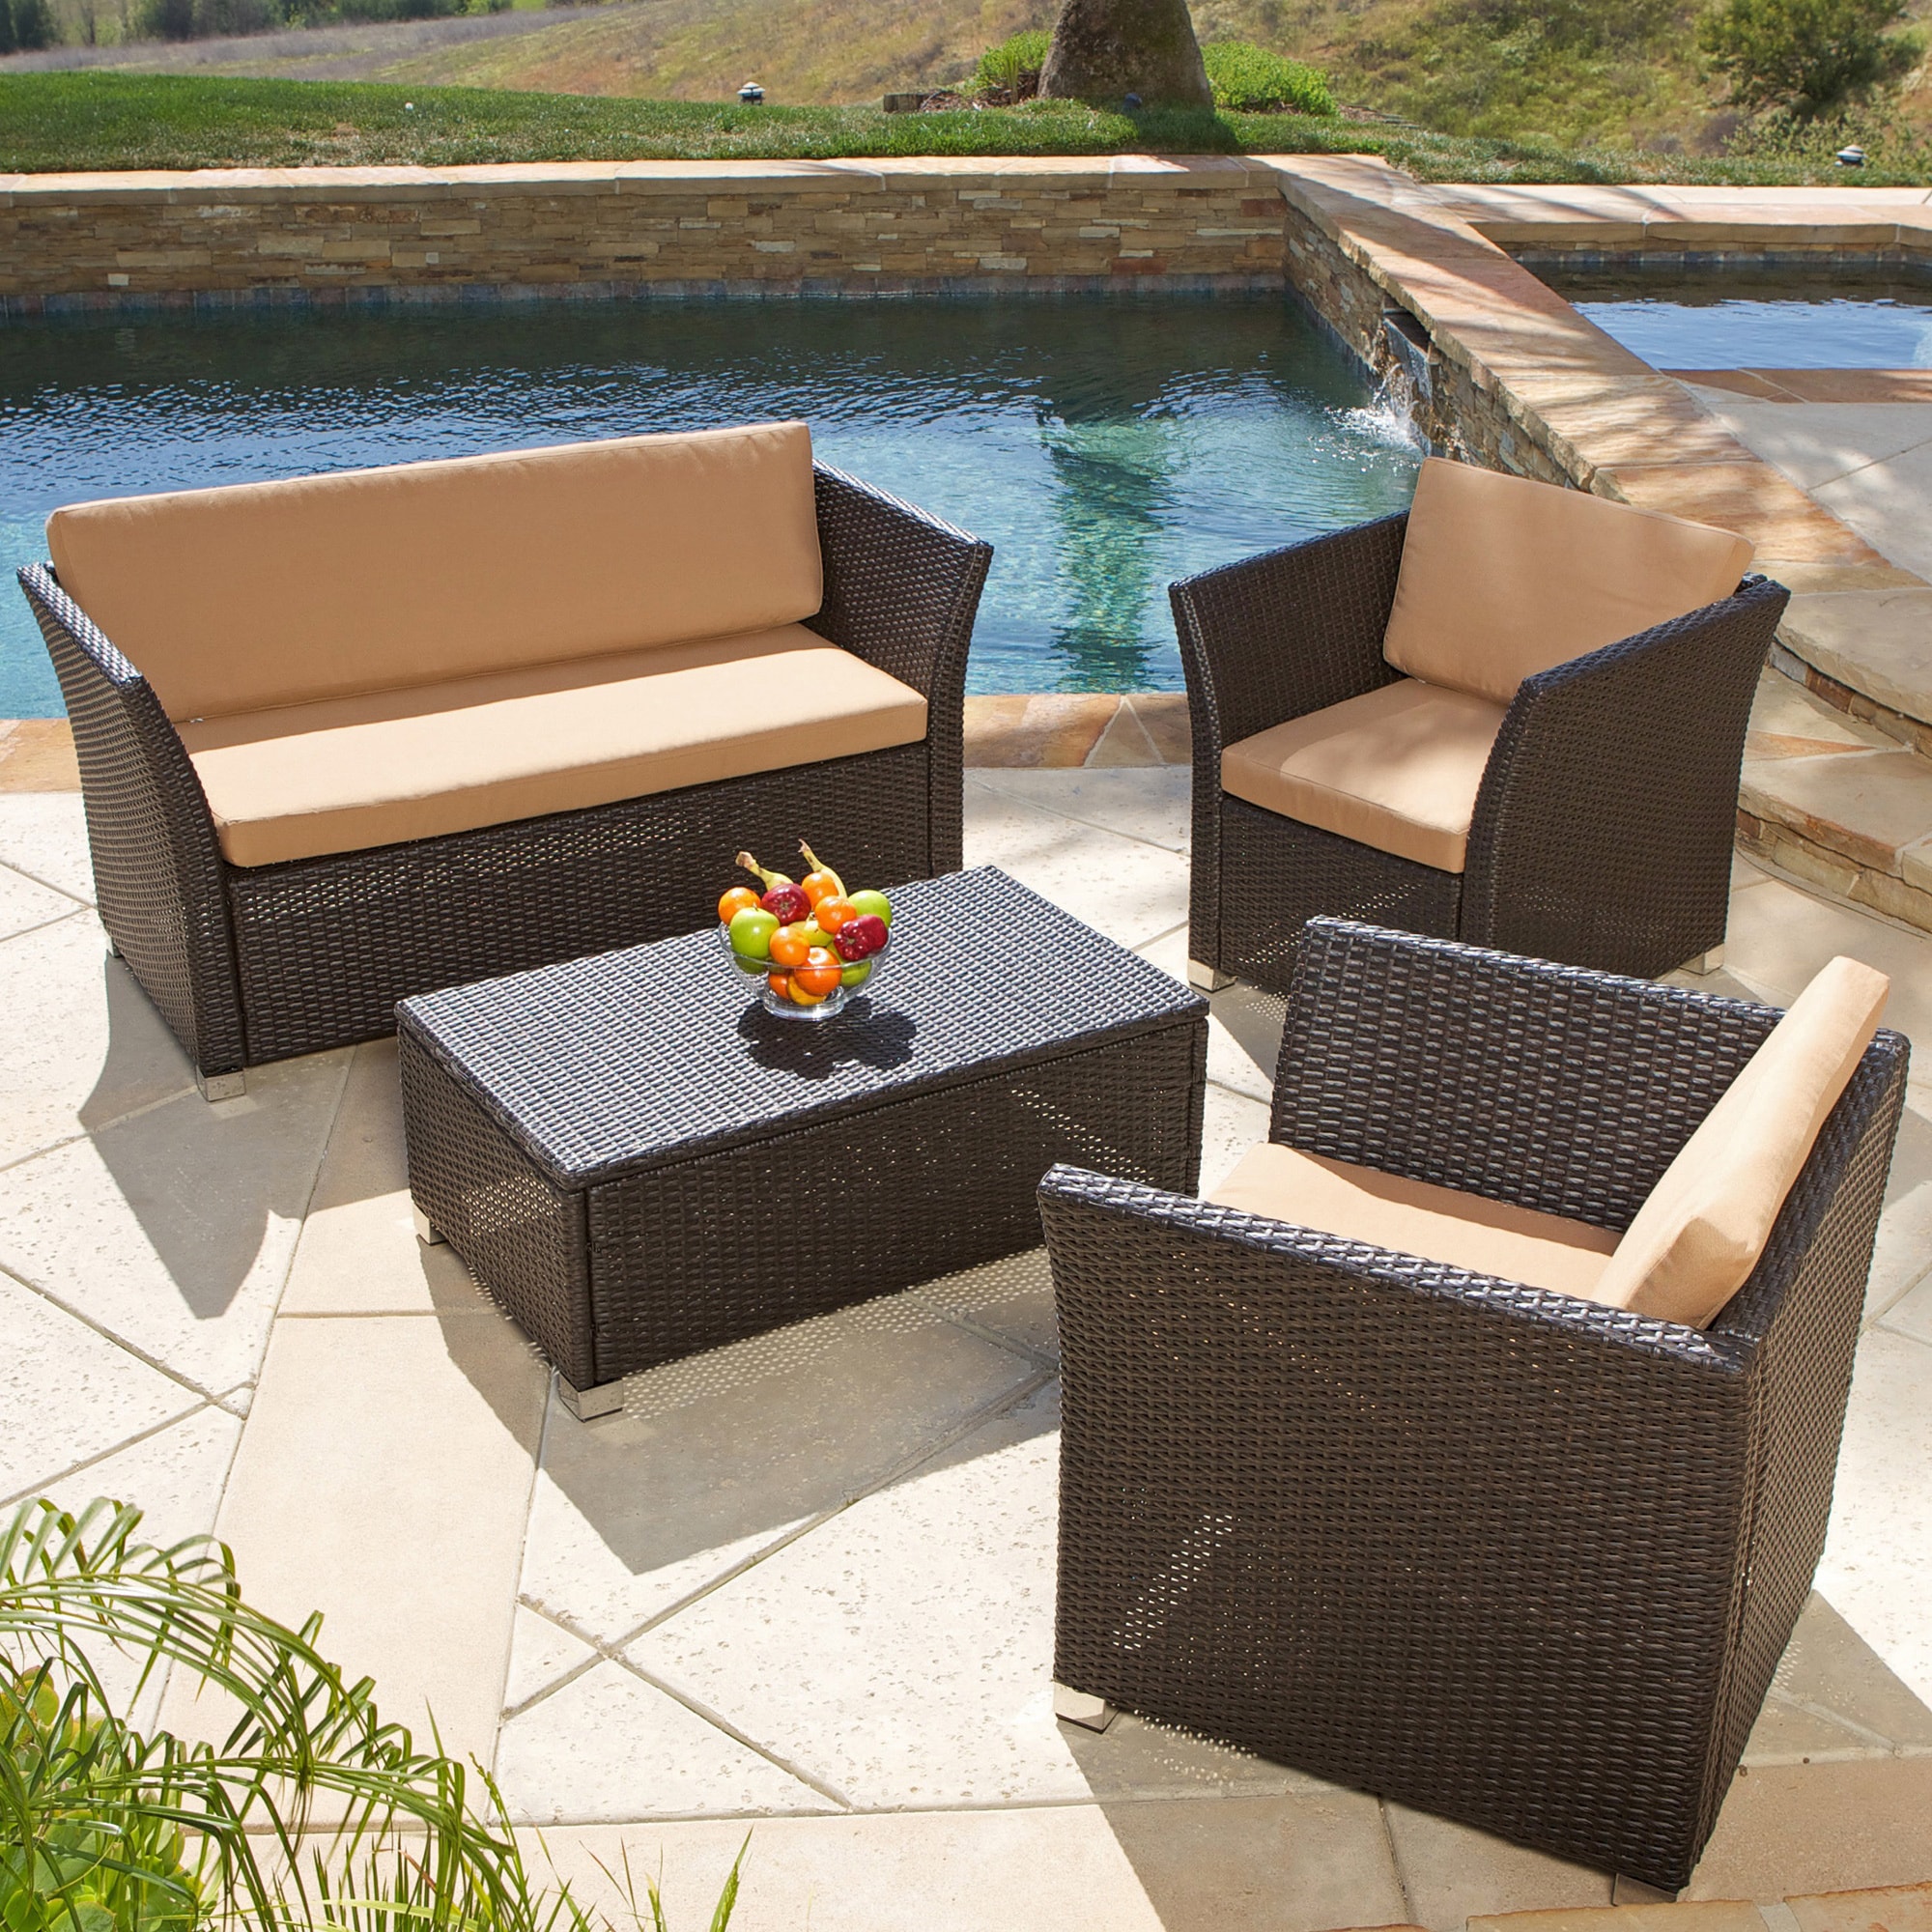 Christopher Knight Home Brown 4 piece All weather Wicker Patio Furniture Sofa Set (Multi/brownMaterials PE Wicker, powder coated iron frame, and Sunbrella fabricFinish BrownCushions included YesWeather resistant cushionsWeather resistant YesUV protect